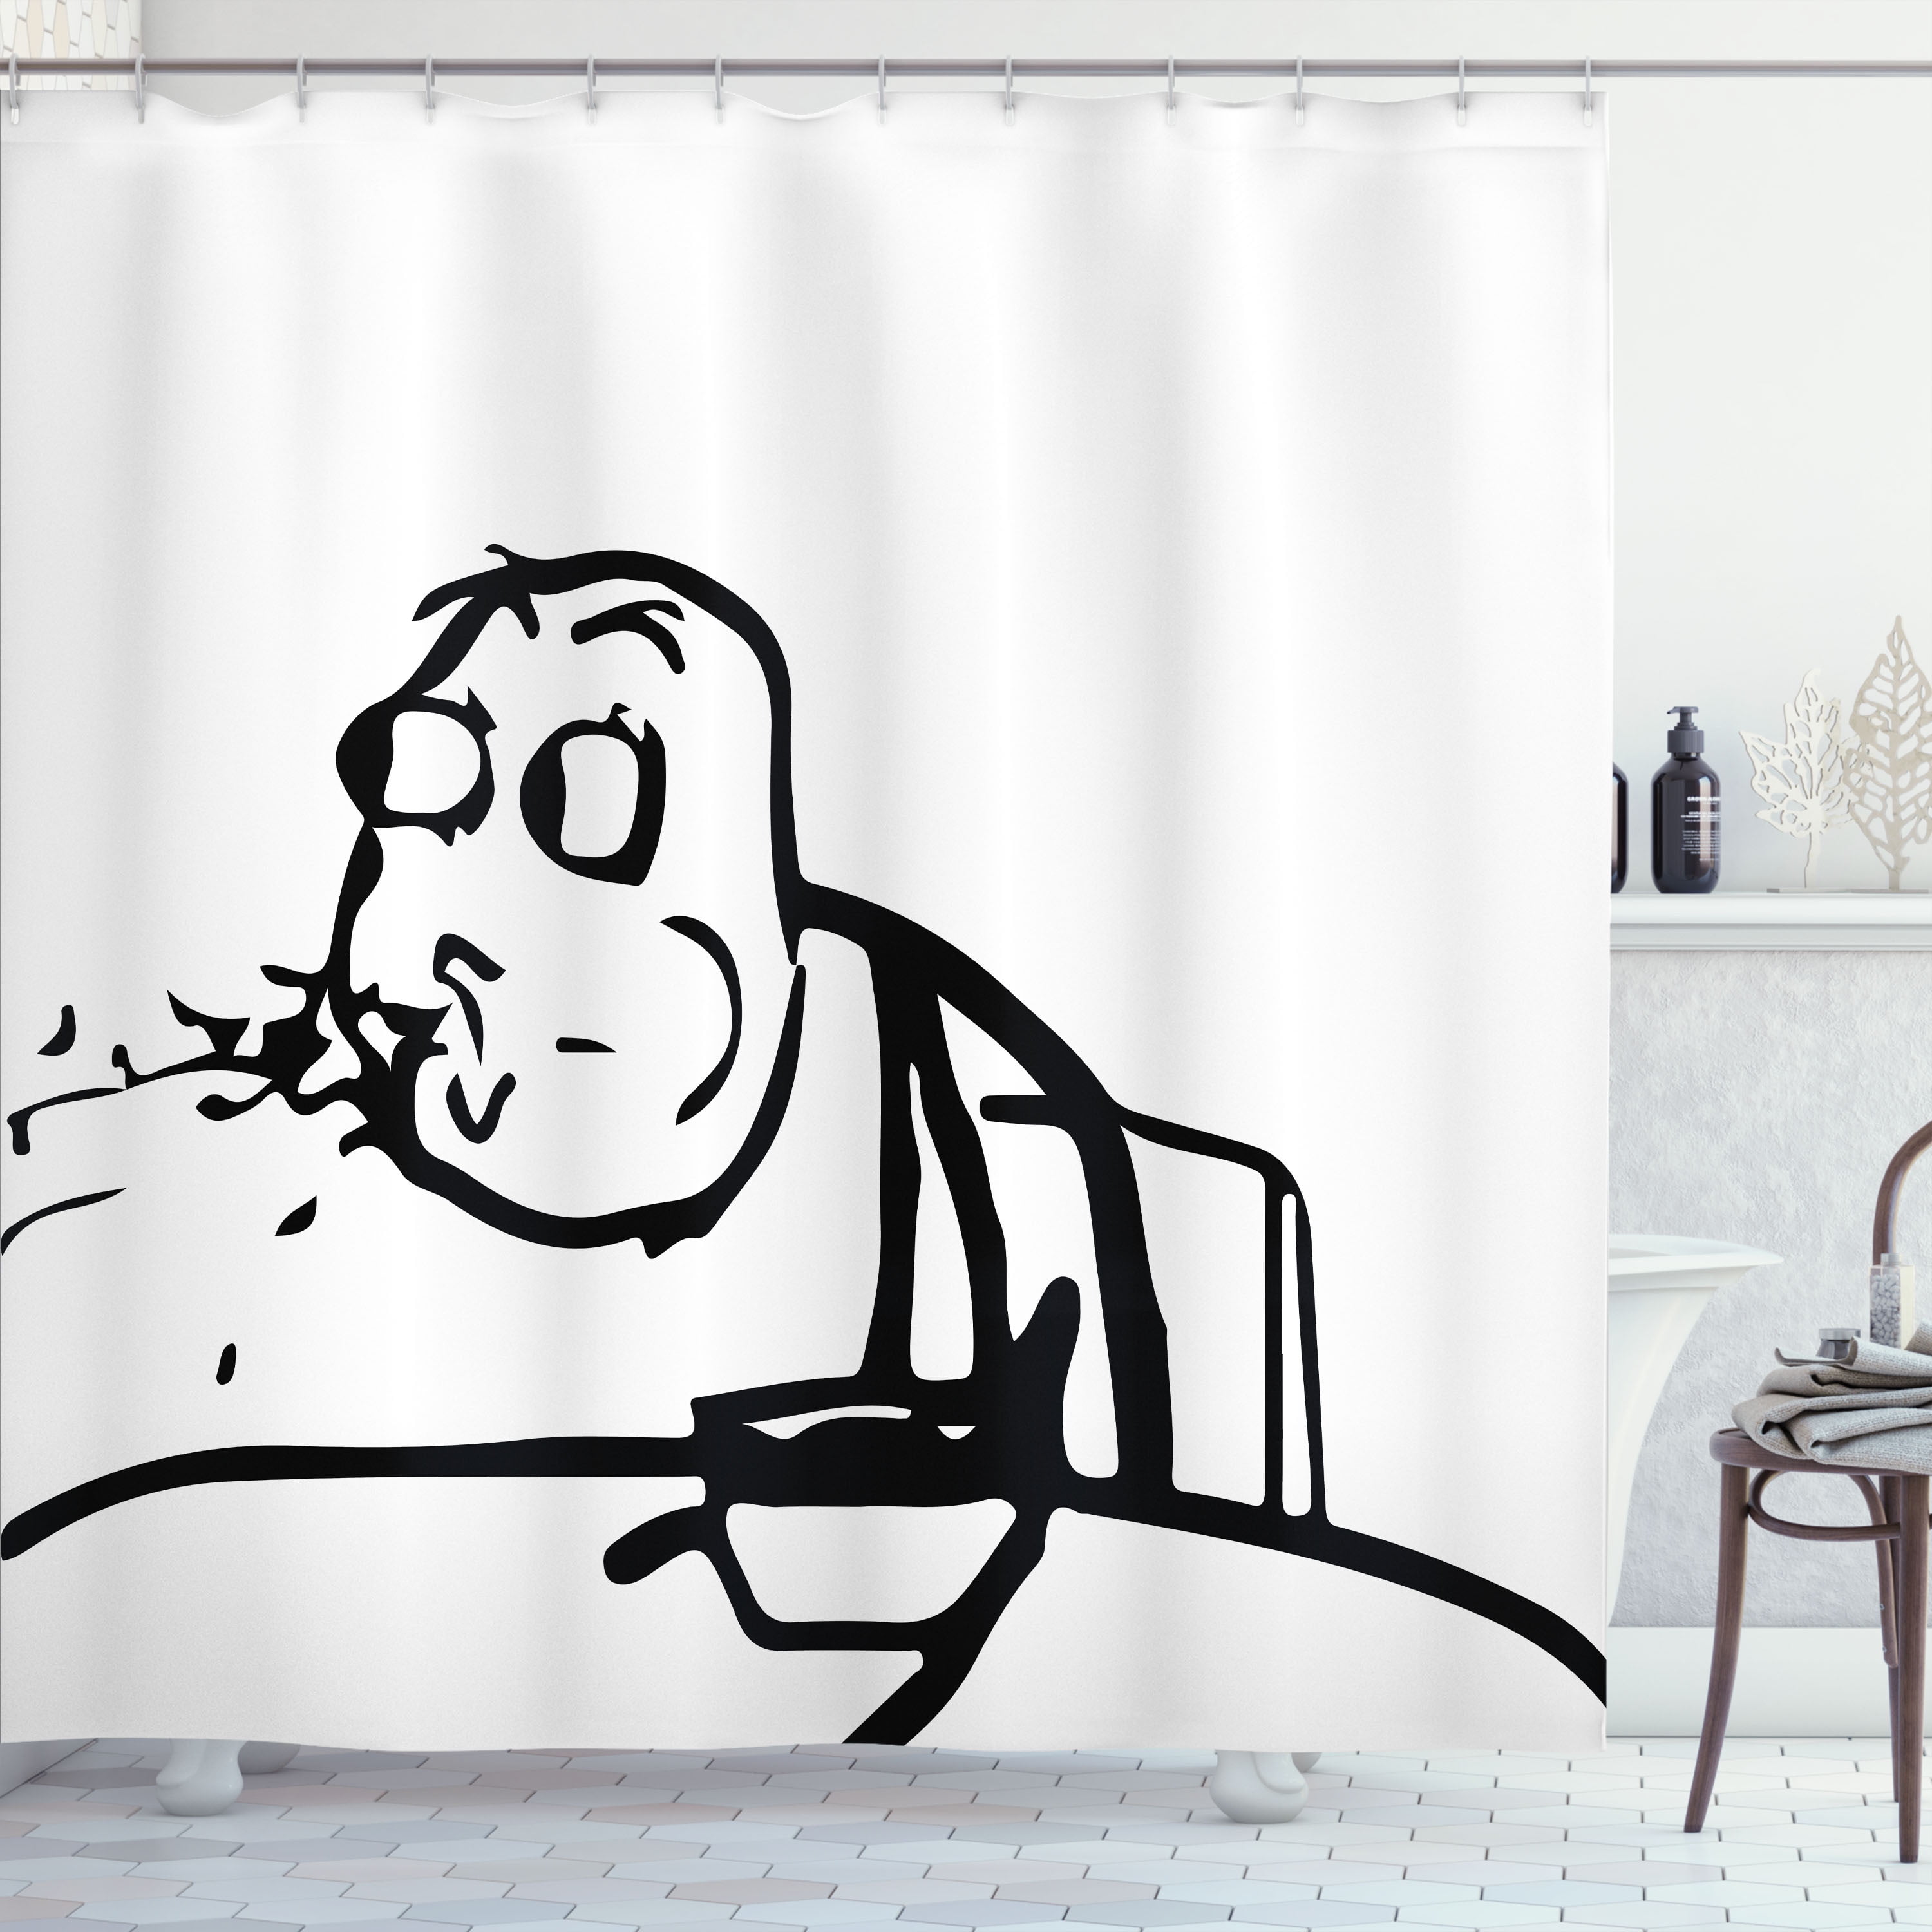 Humor Curtains 2 Panels Set, Stickman Meme Face Icon Looking at Computer  Joyful Fun Caricature Comic Design, Window Drapes for Living Room Bedroom,  108W X 63L Inches, Black and White, by Ambesonne 